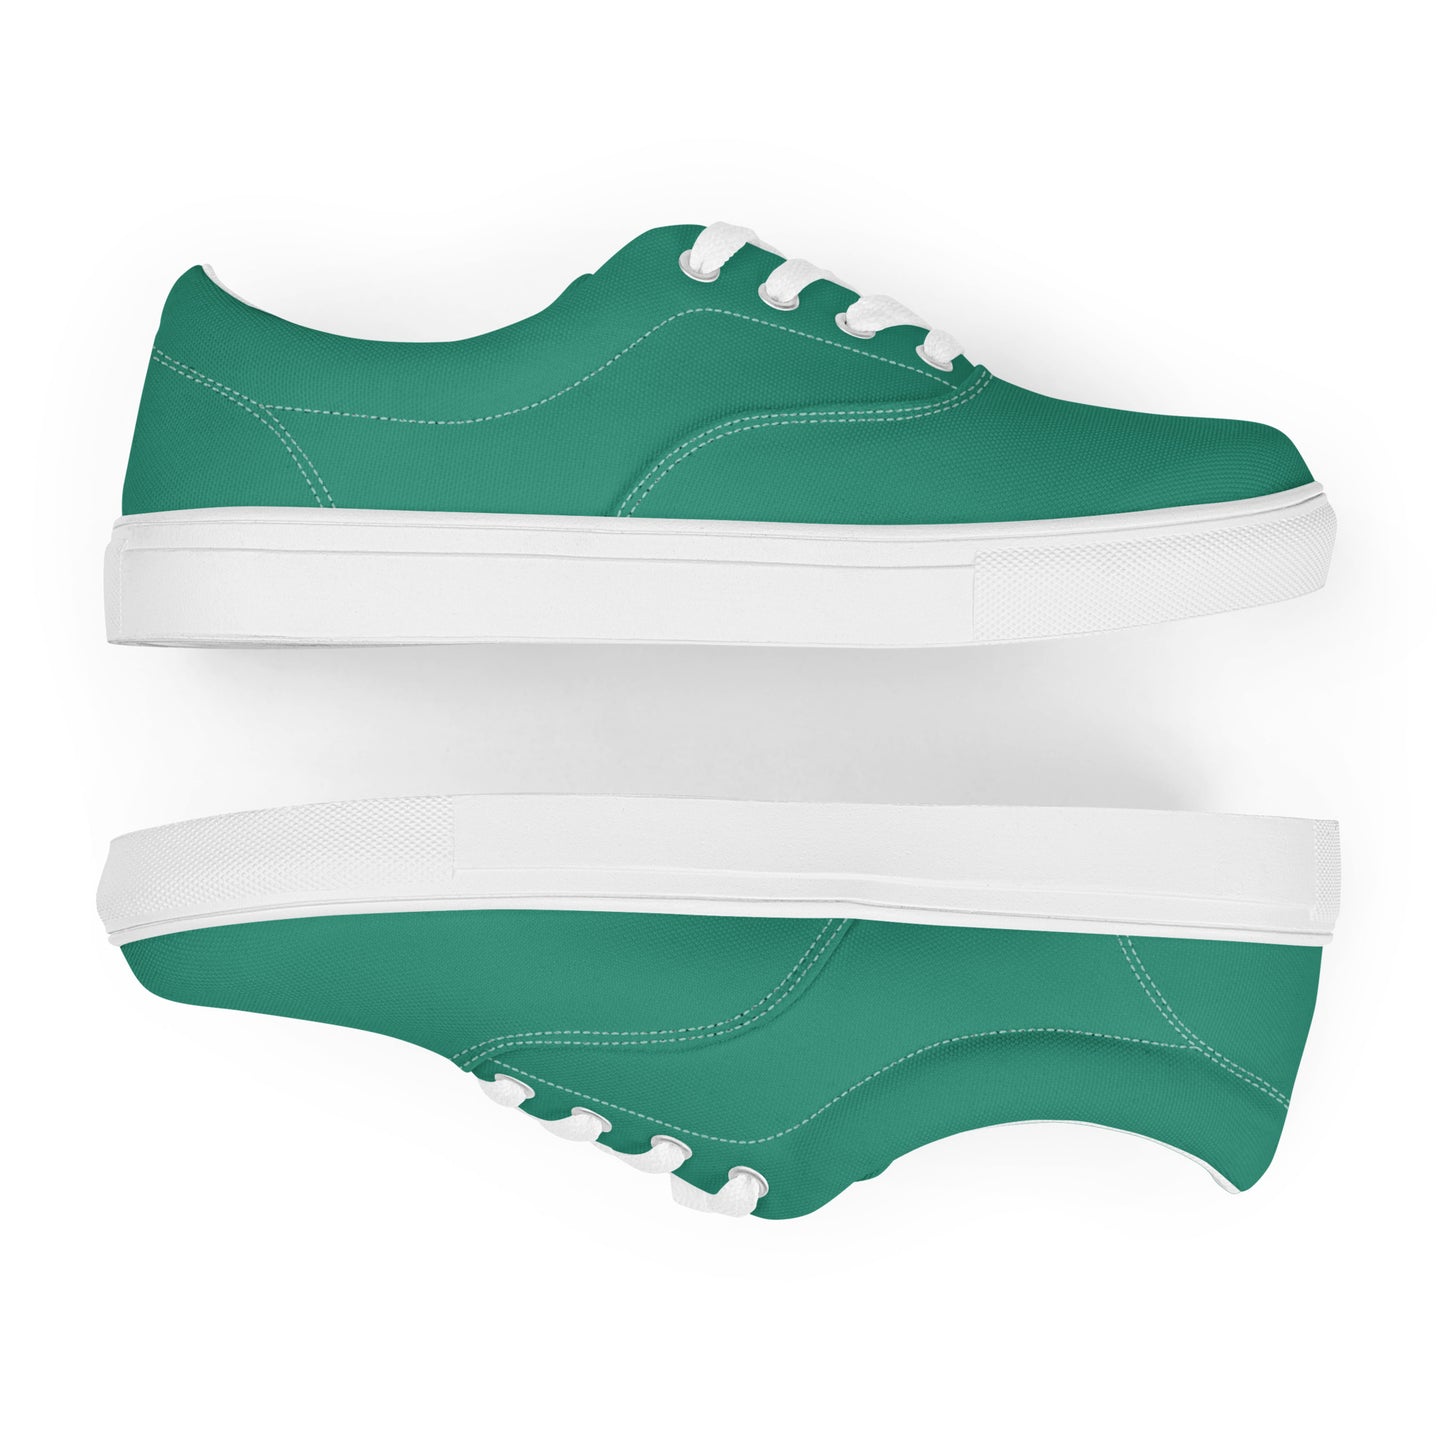 Women’s Elf Green Lace-Up